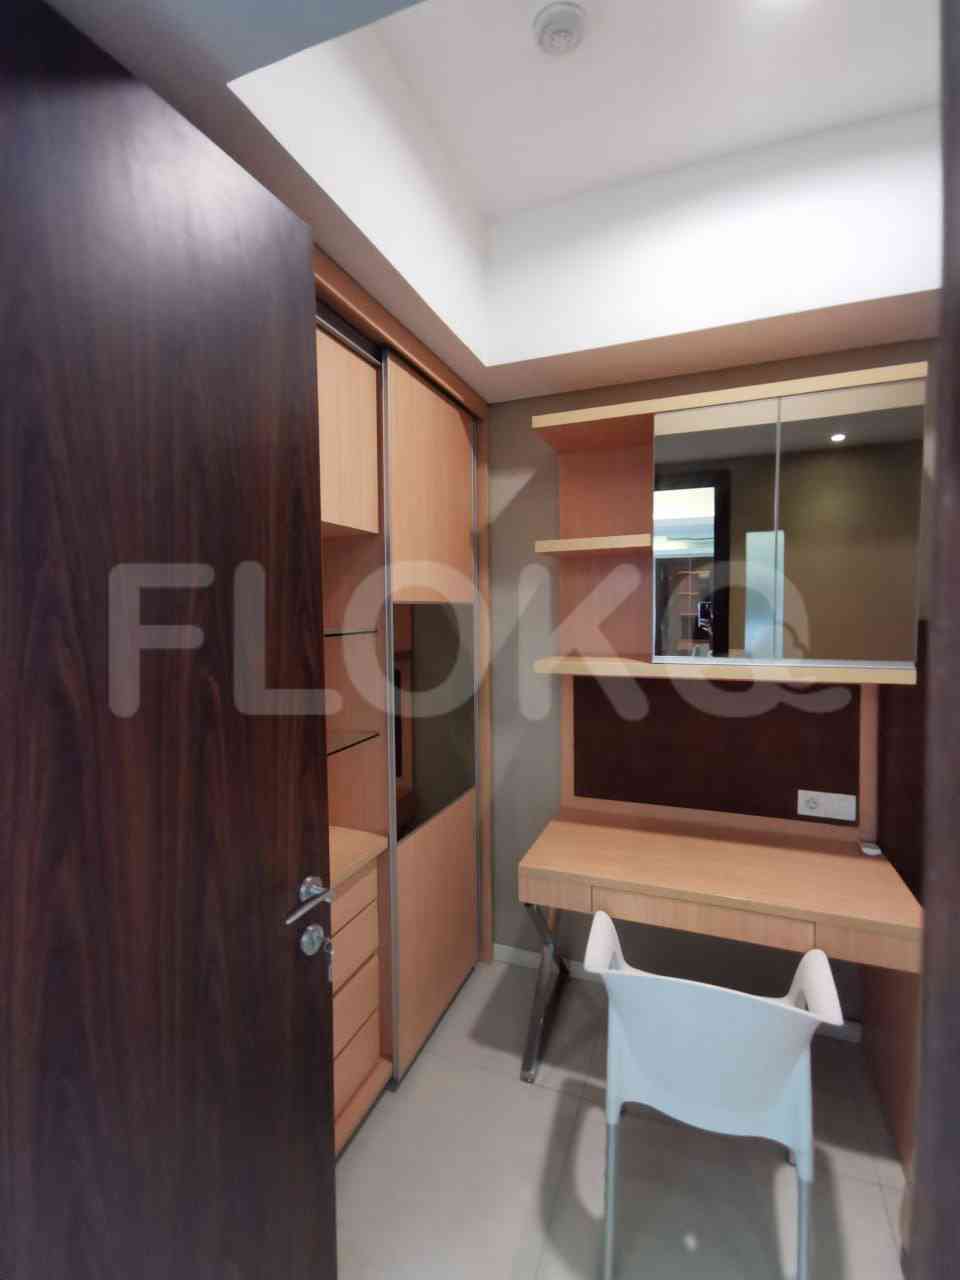 2 Bedroom on 26th Floor for Rent in Kemang Village Residence - fkea2f 7